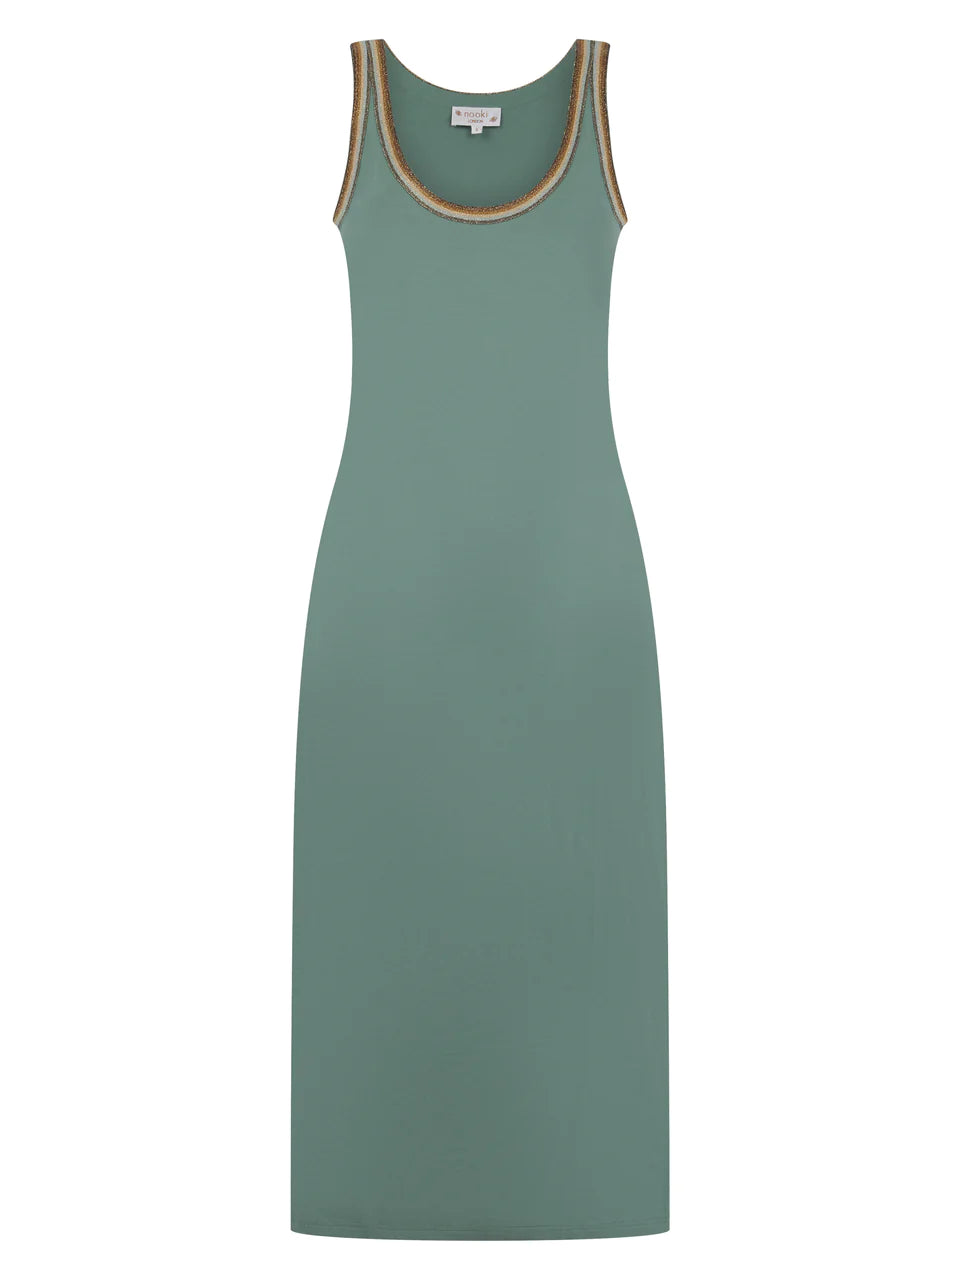 Update your everyday style with Nooki Design's Finch Floor-Length Jersey Dress in the serene Seafoam&nbsp; or Khaki colours. This dress is crafted with care, featuring a blend of 95% cotton and 5% Elastane for a soft and stretchy feel that ensures all day comfort.